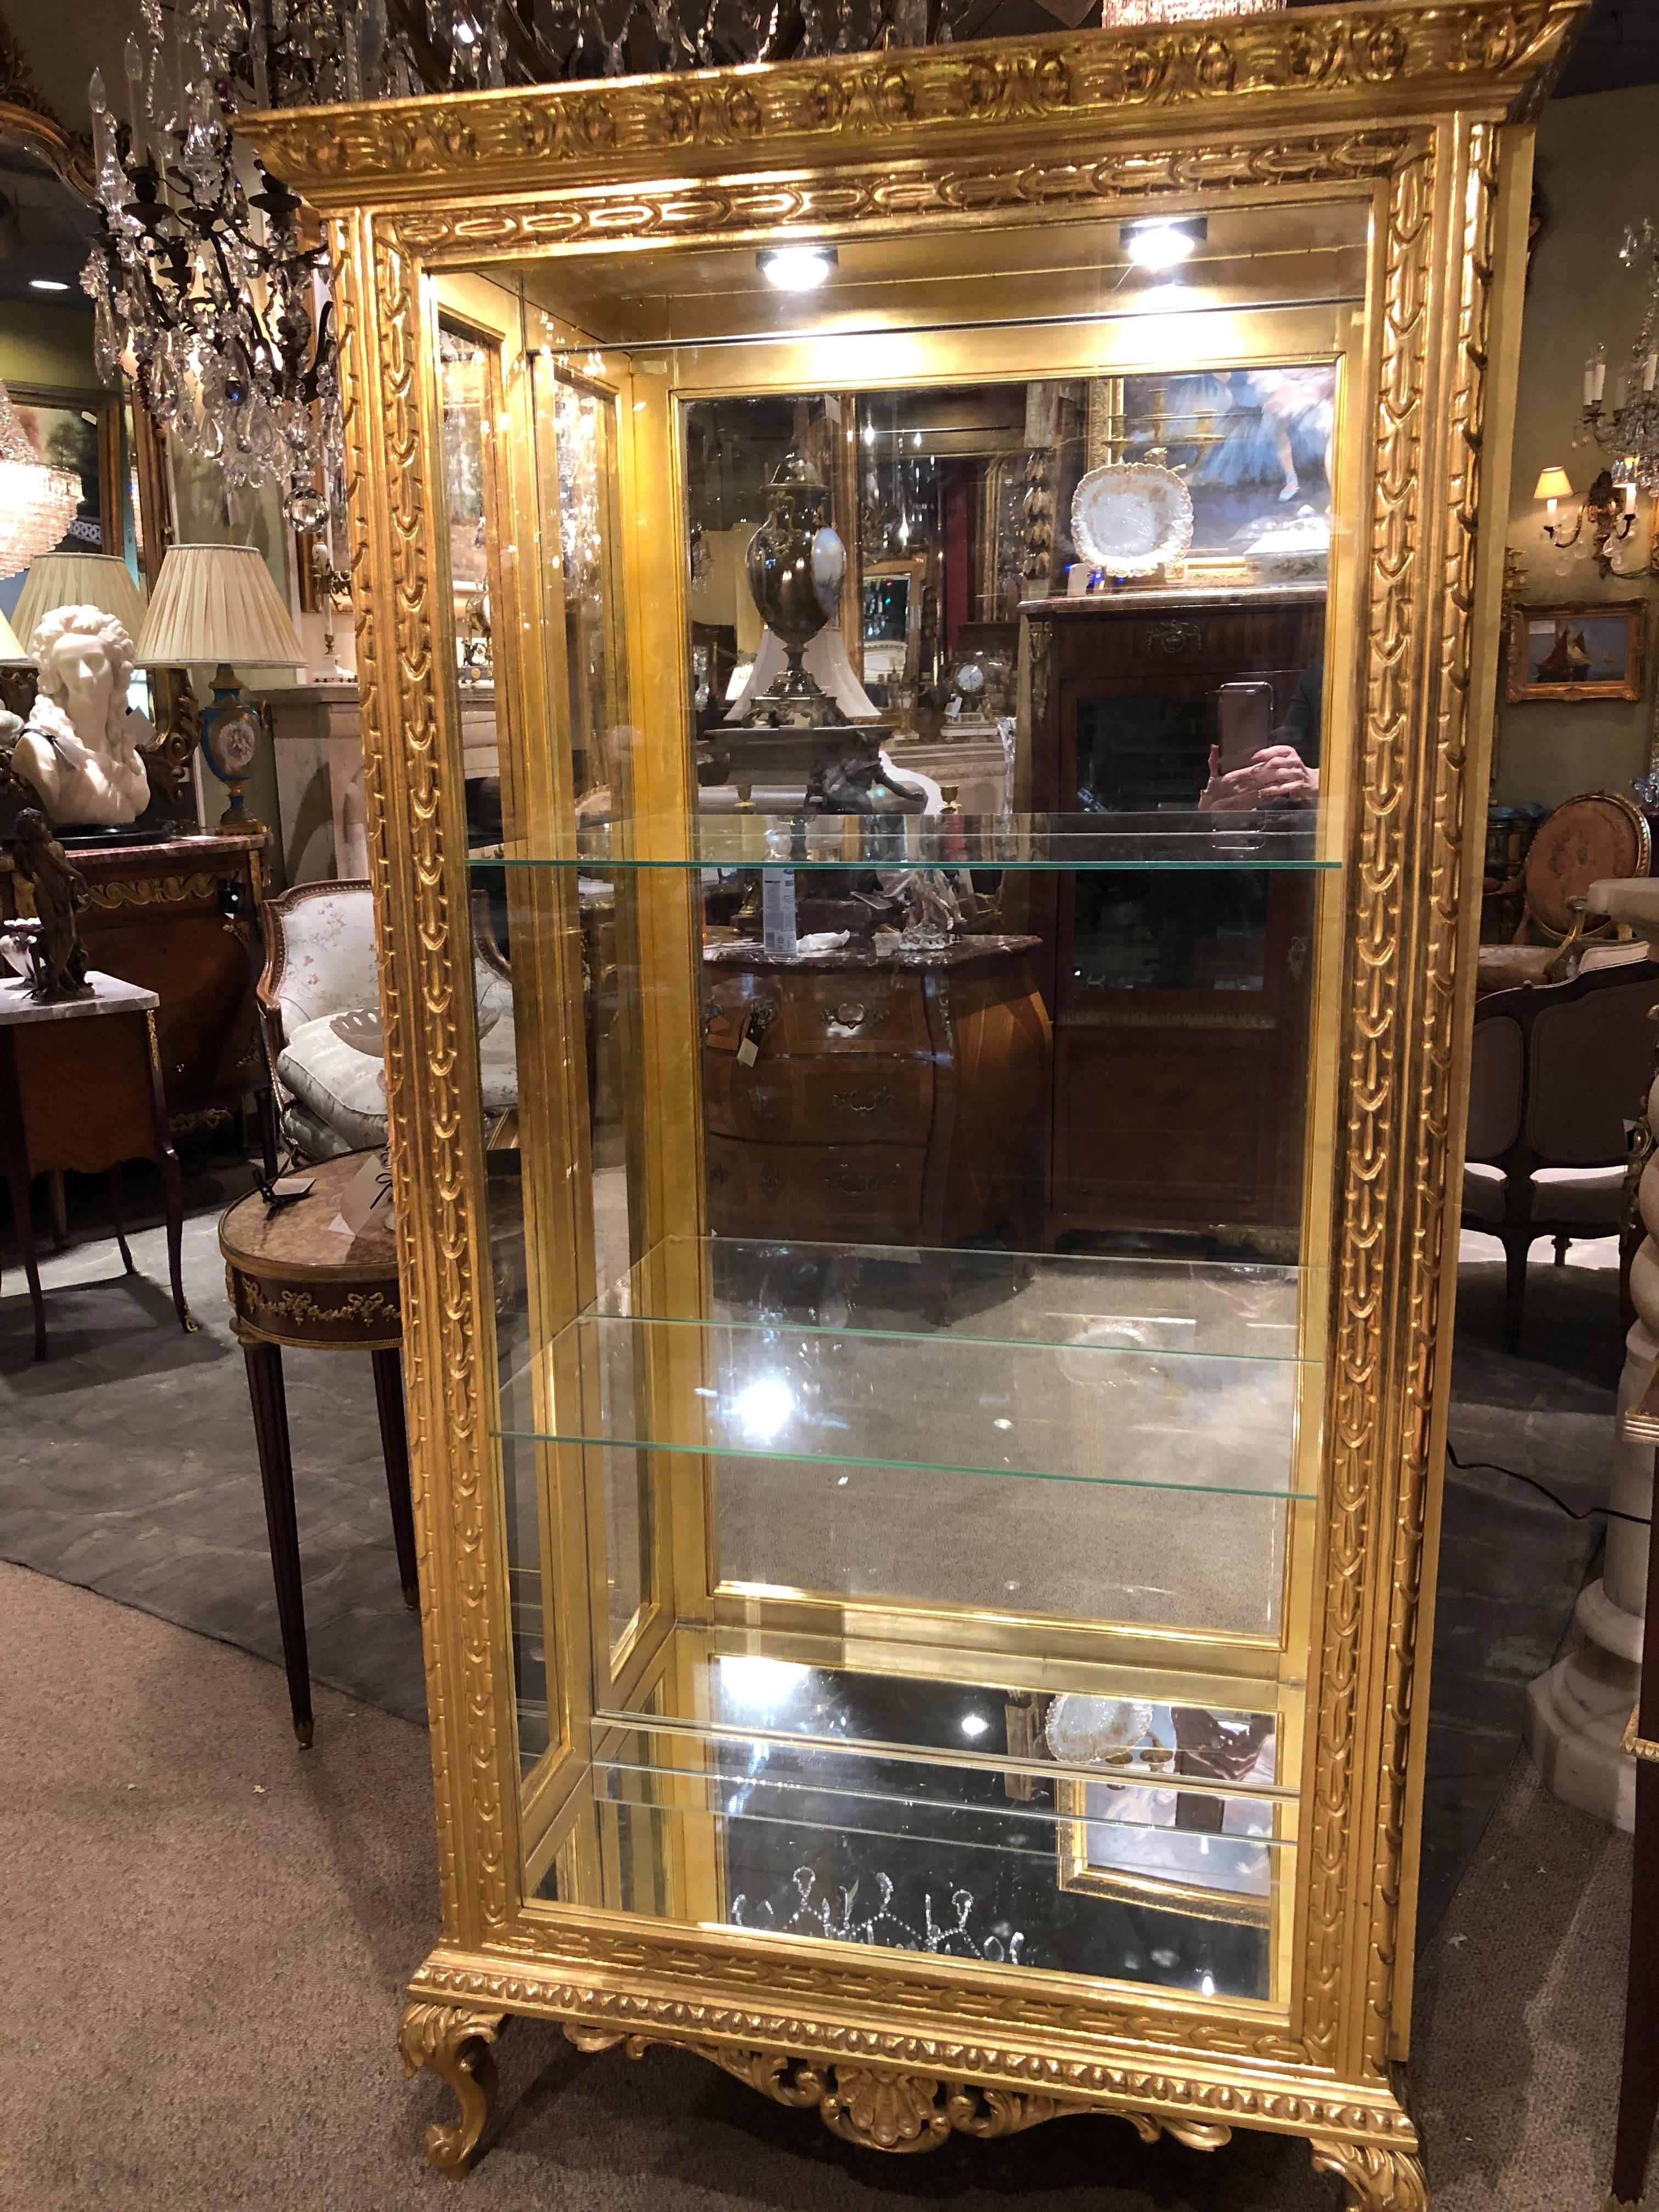 Mirror back with lighting and two glass shelves
Side opens on both sides which leaves the
Front very clear for display. The gilding is
Original.